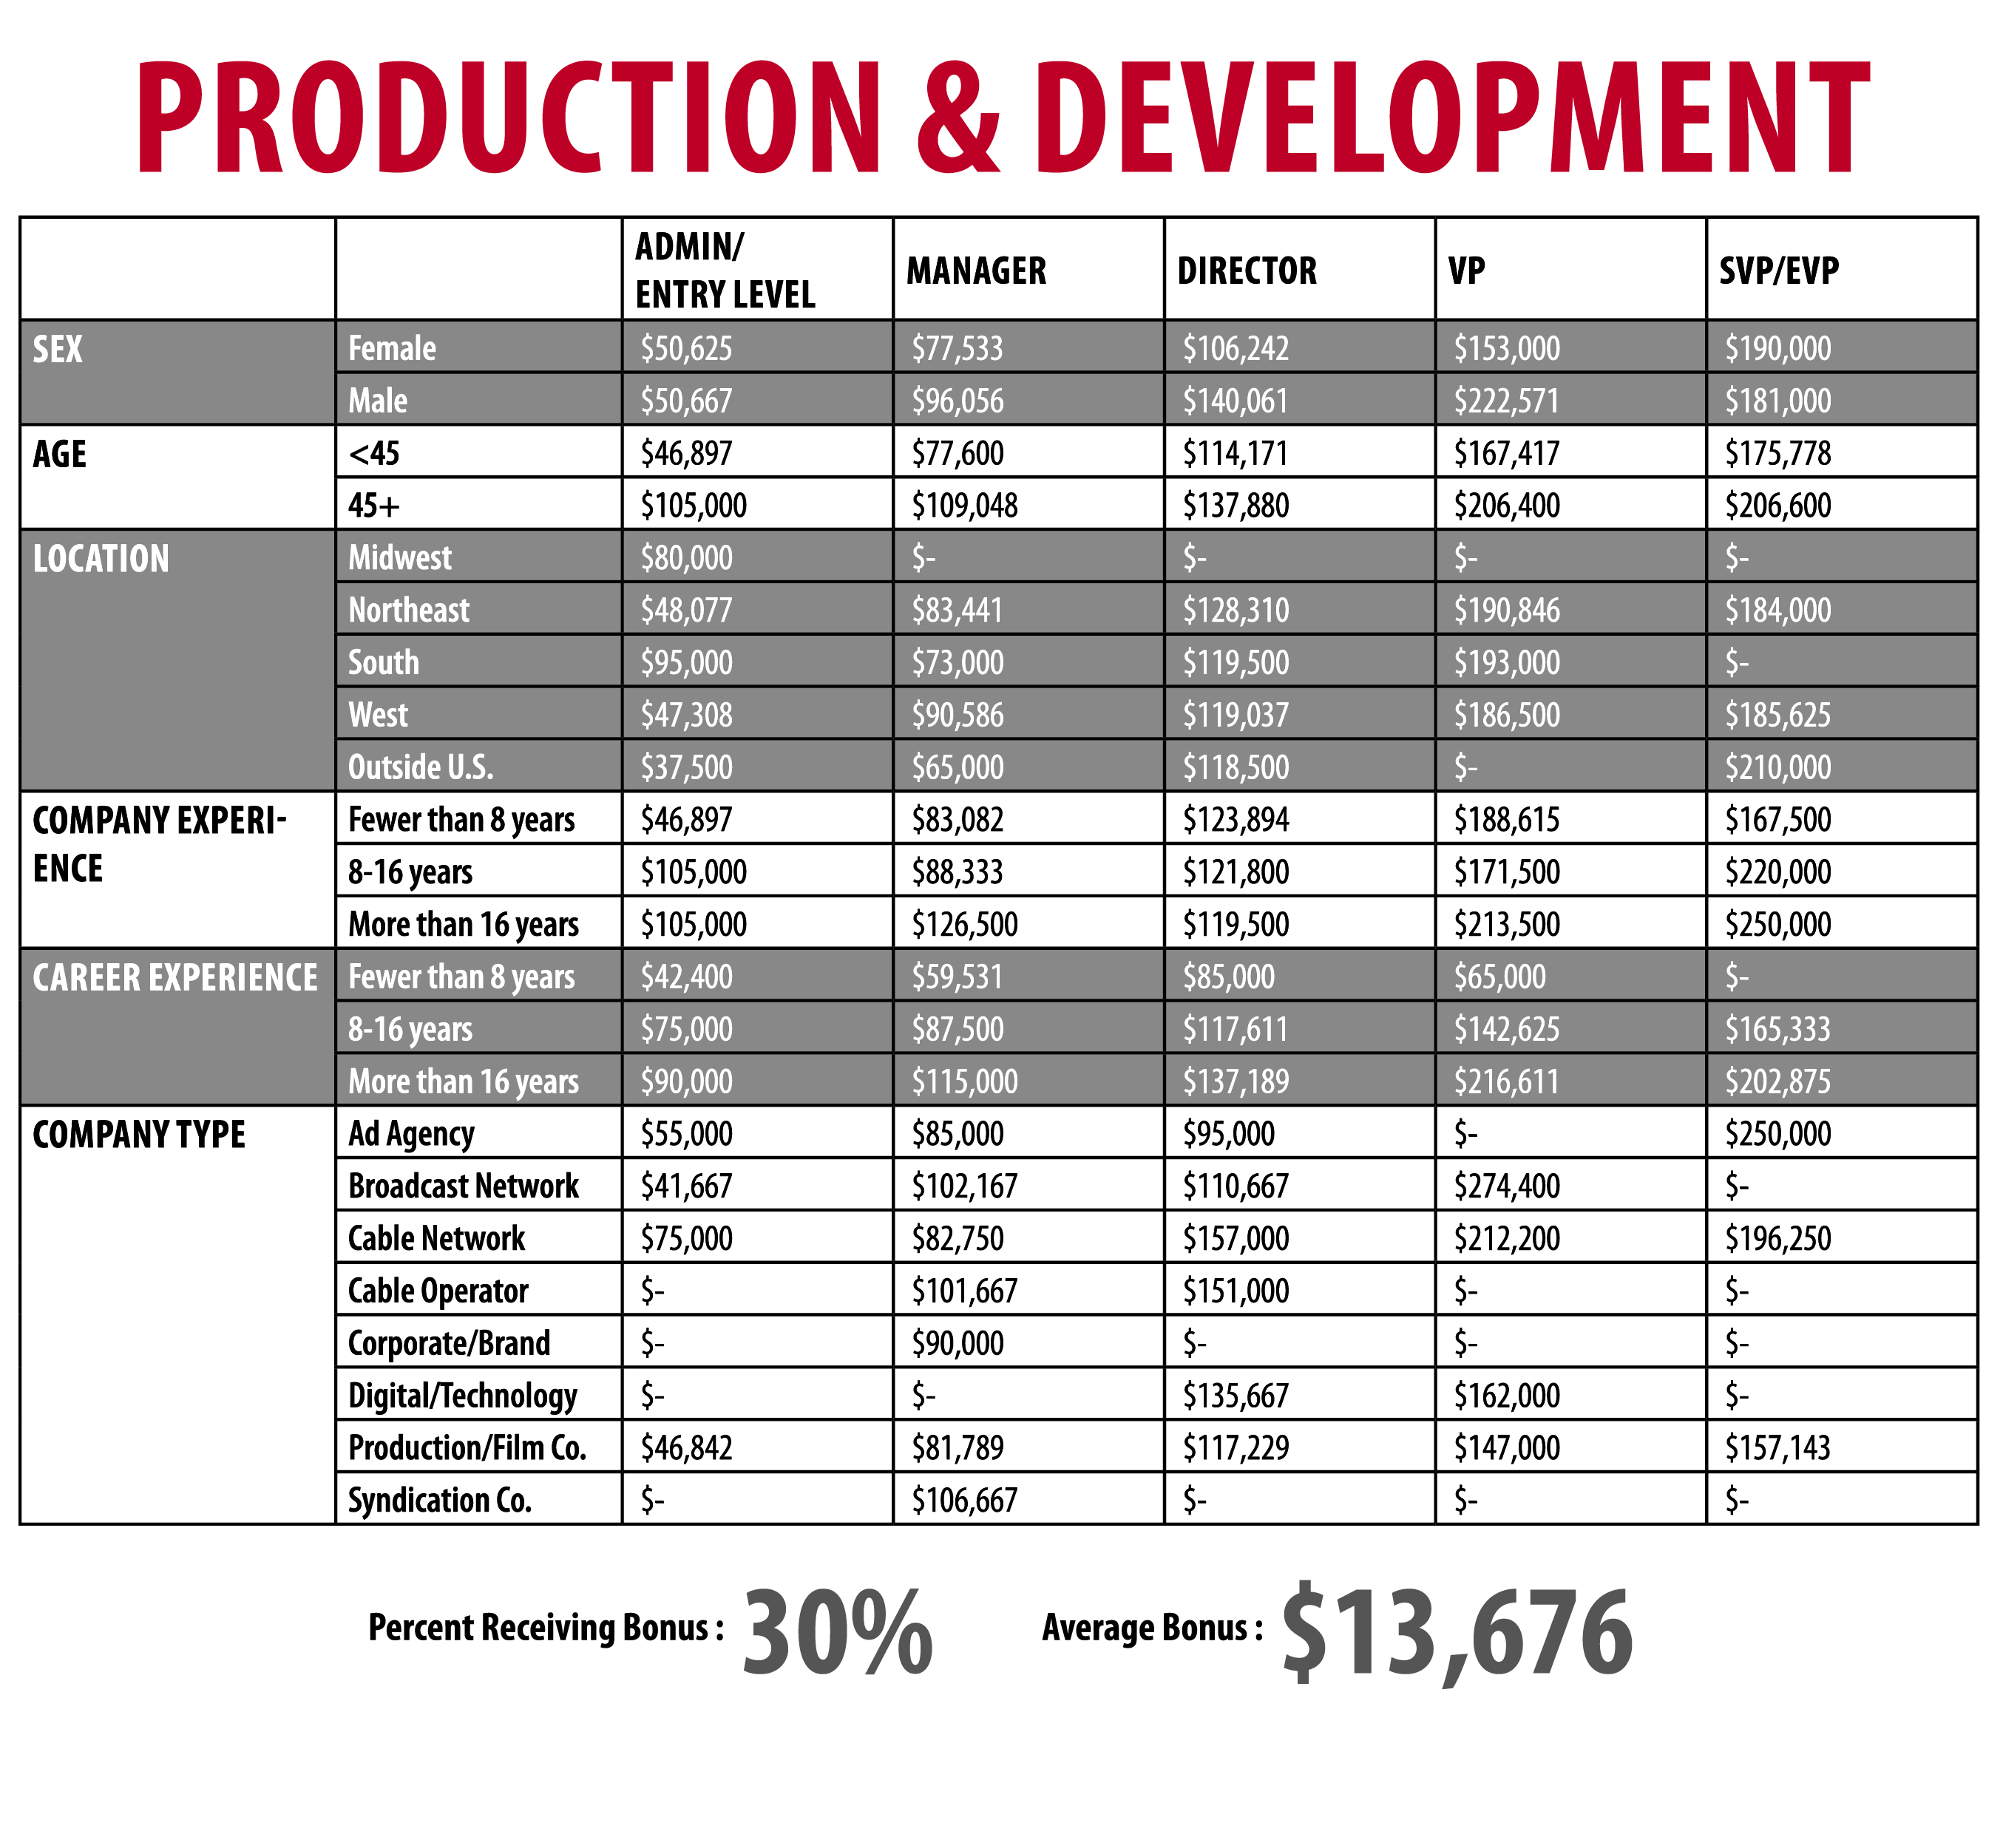 ProductionDevelopment_Chart_Outlined